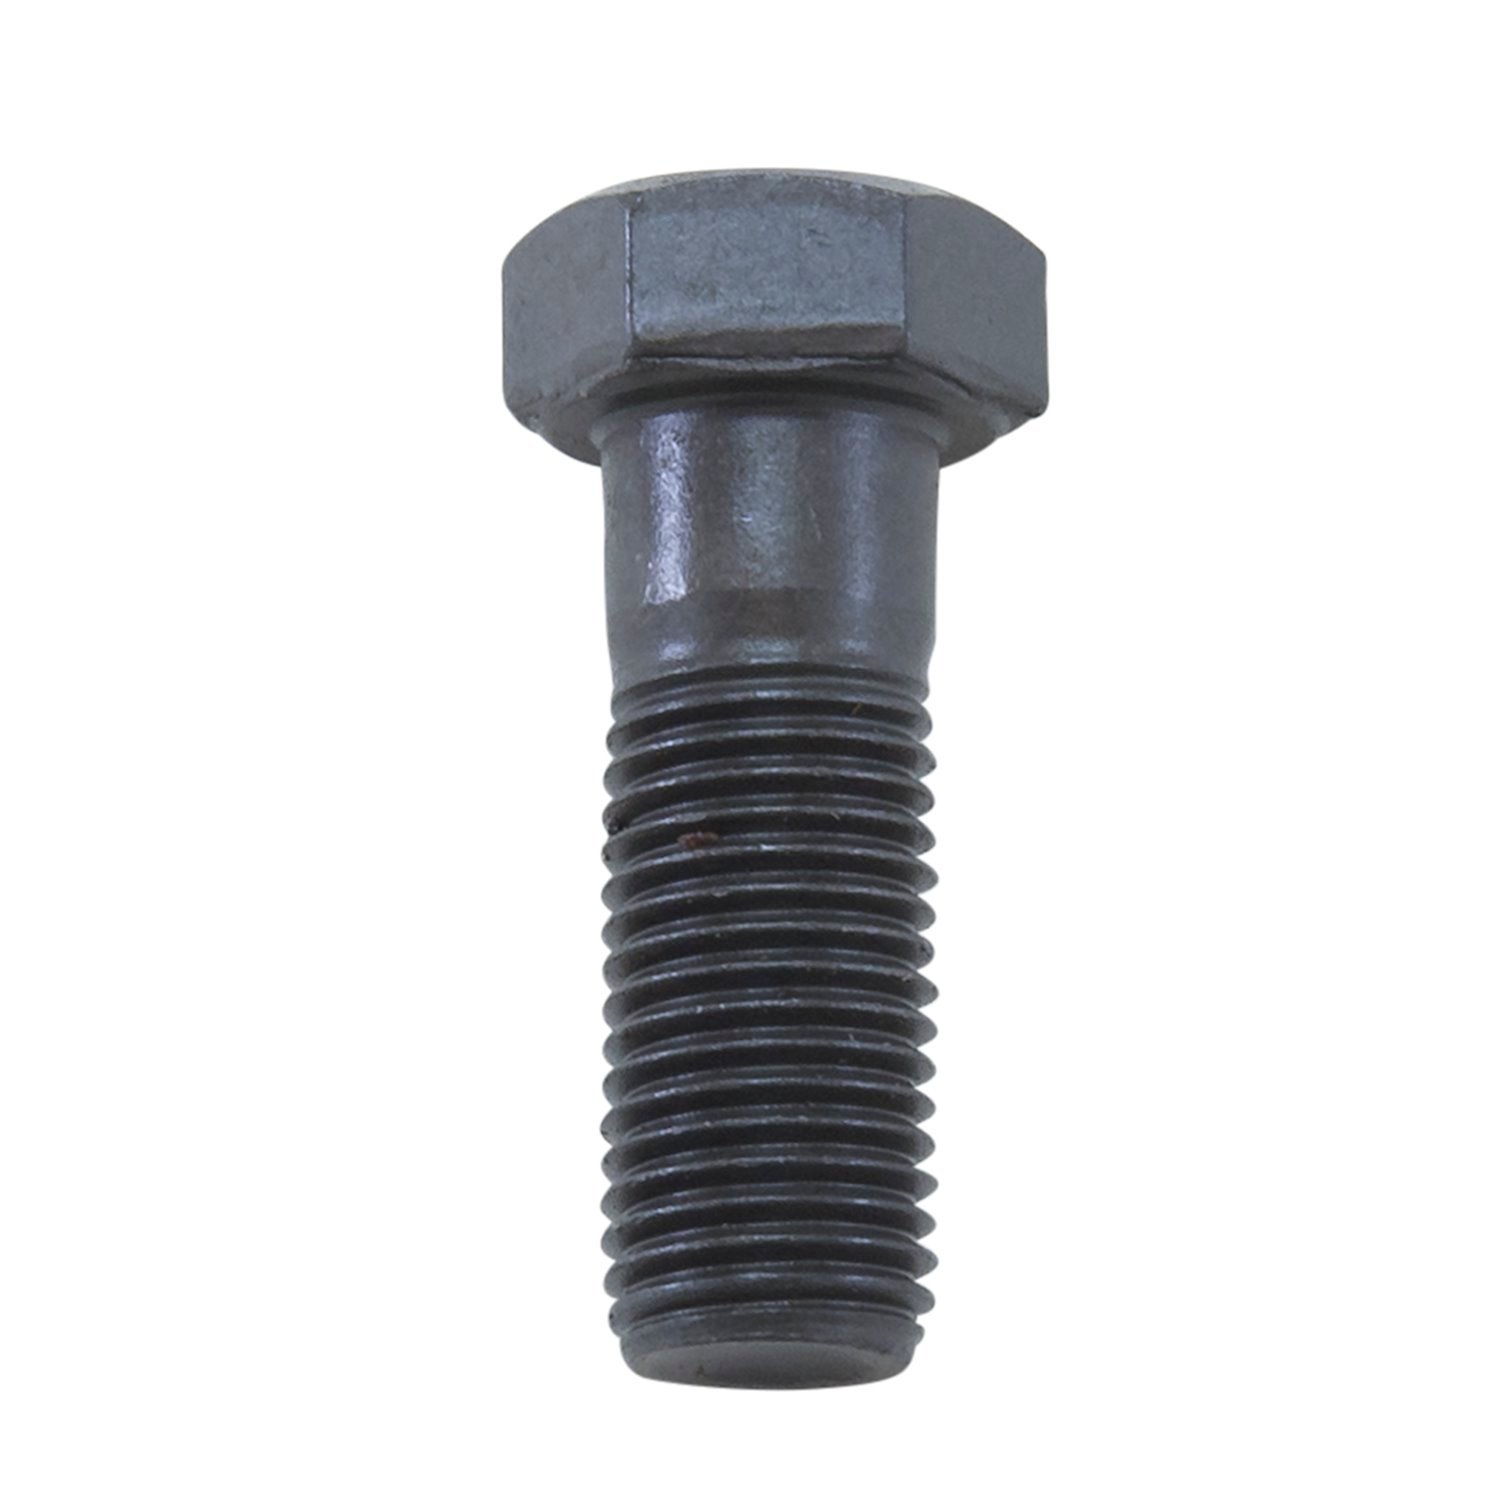 Ford 8 in. & 9 in. Tracloc Ring Gear Bolt